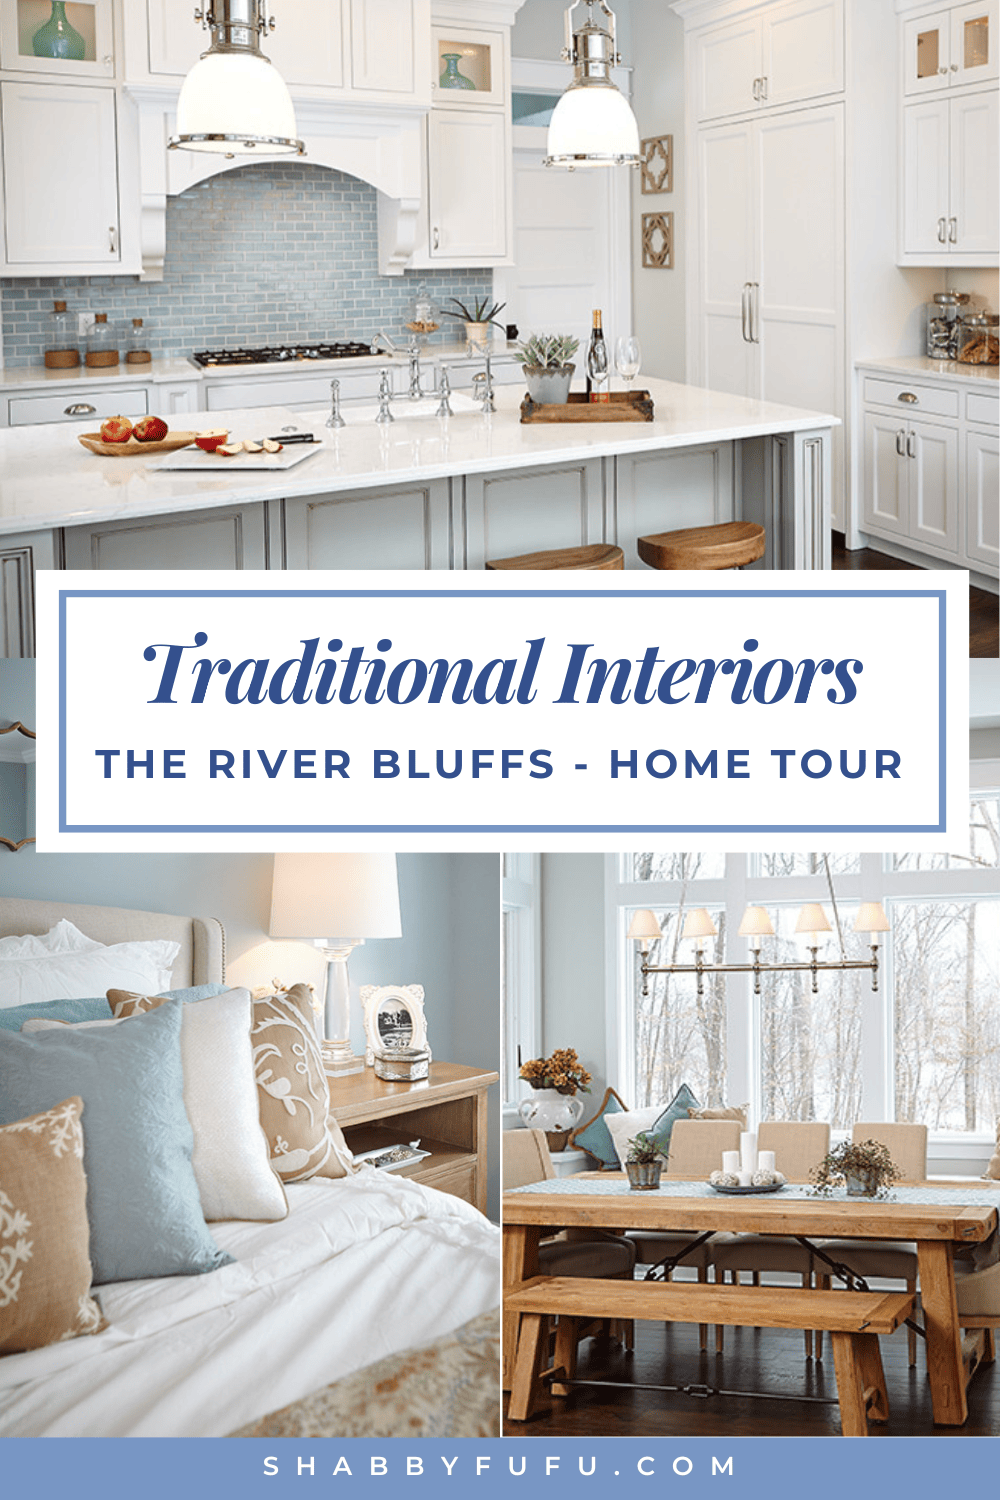 Pinterest decorative collage featuring pictures of home titled "Traditional Interiors - The River Bluffs Home Tour"